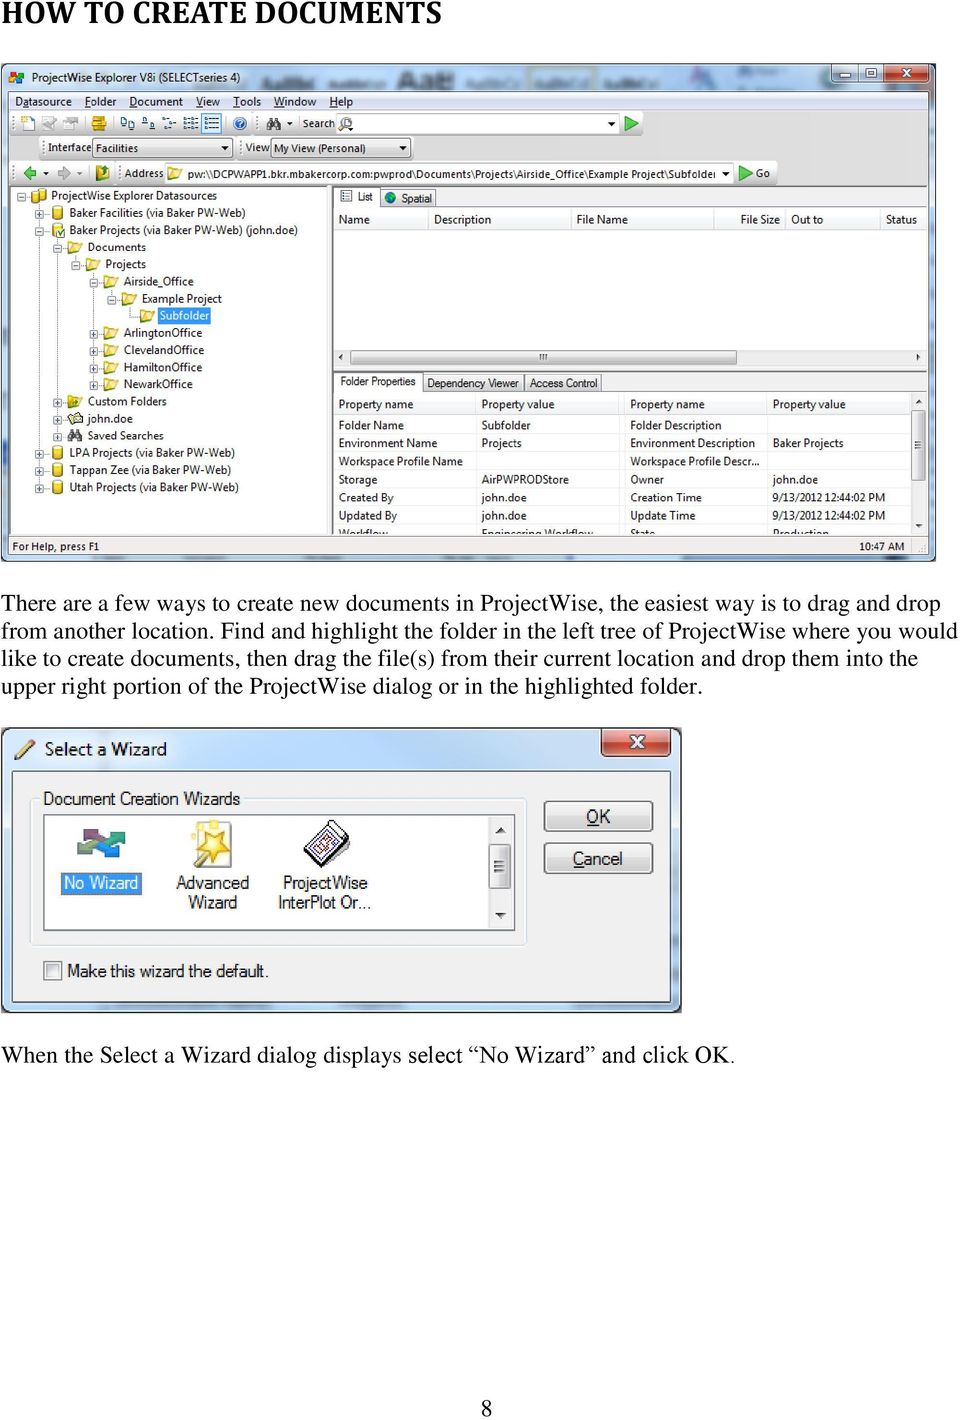 Find and highlight the folder in the left tree of ProjectWise where you would like to create documents, then drag the